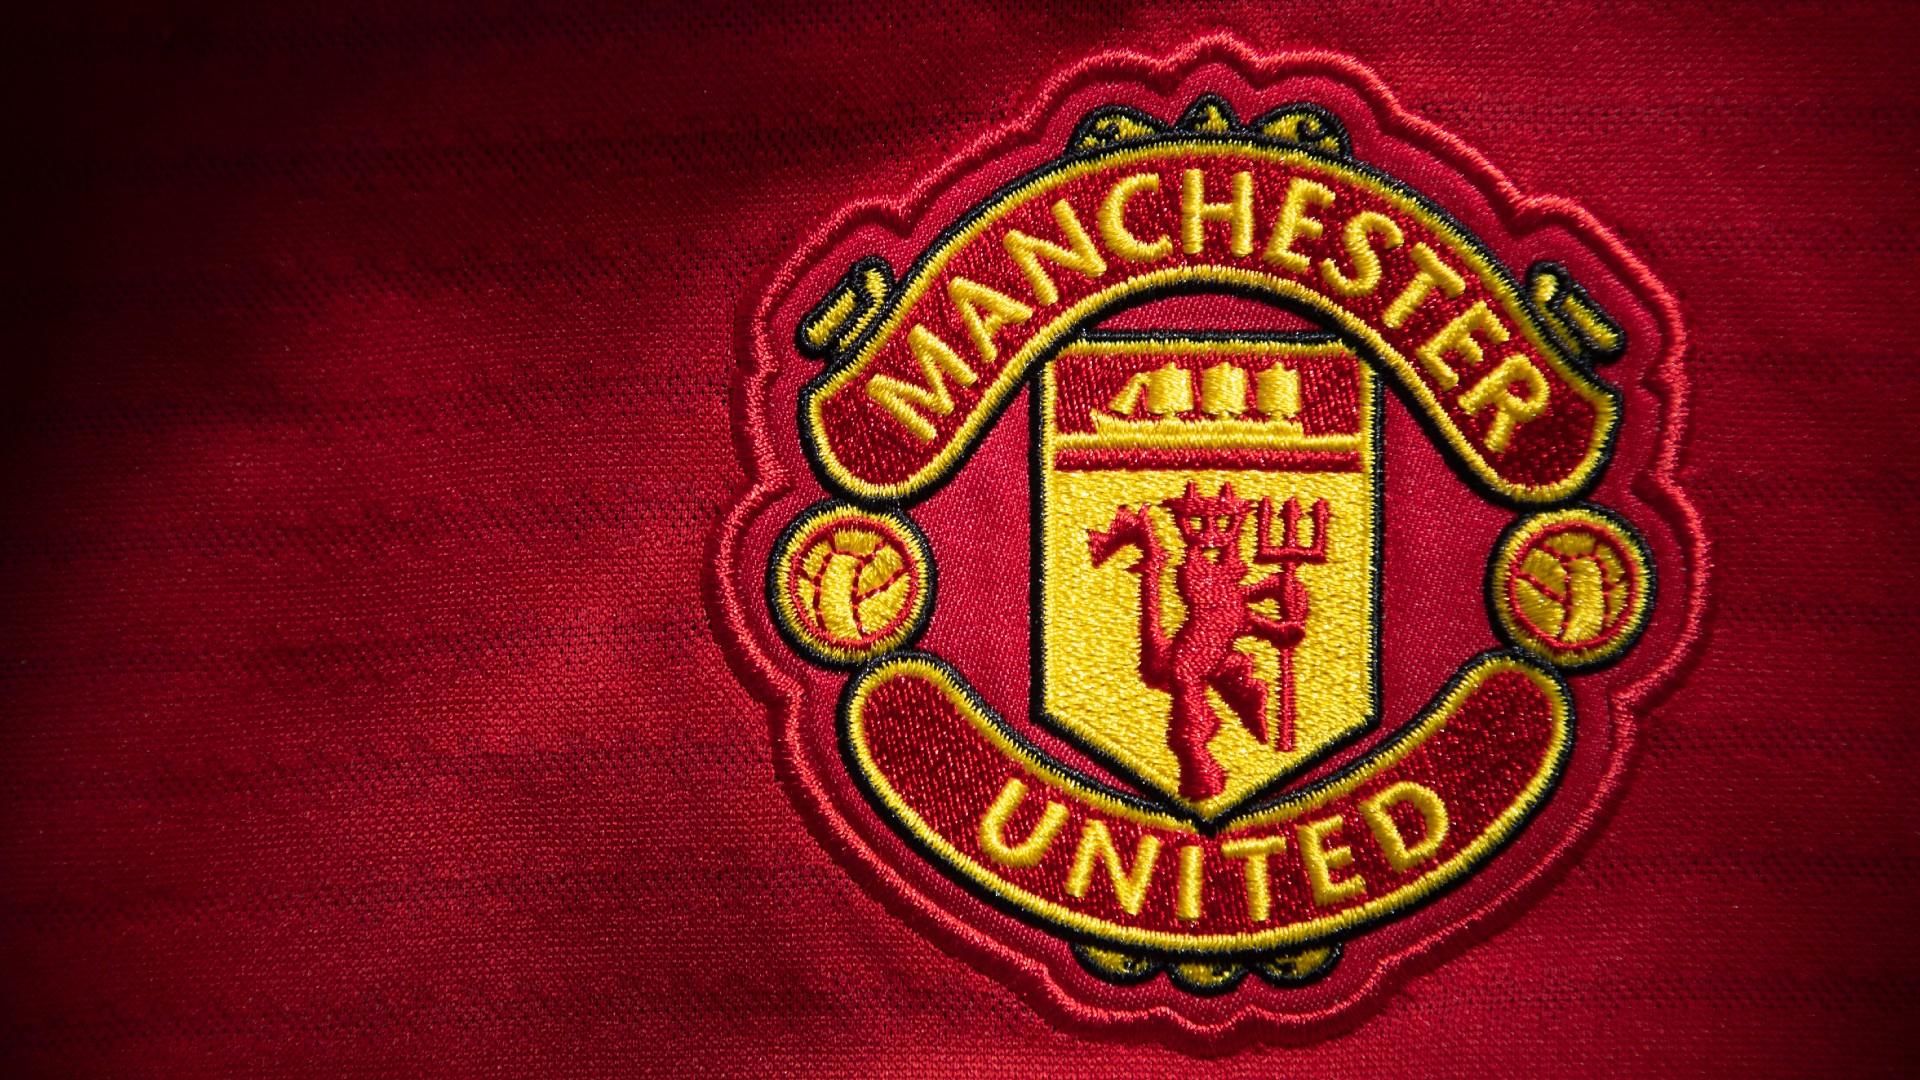 Investors from Qatar are ready to make an offer to buy Manchester United